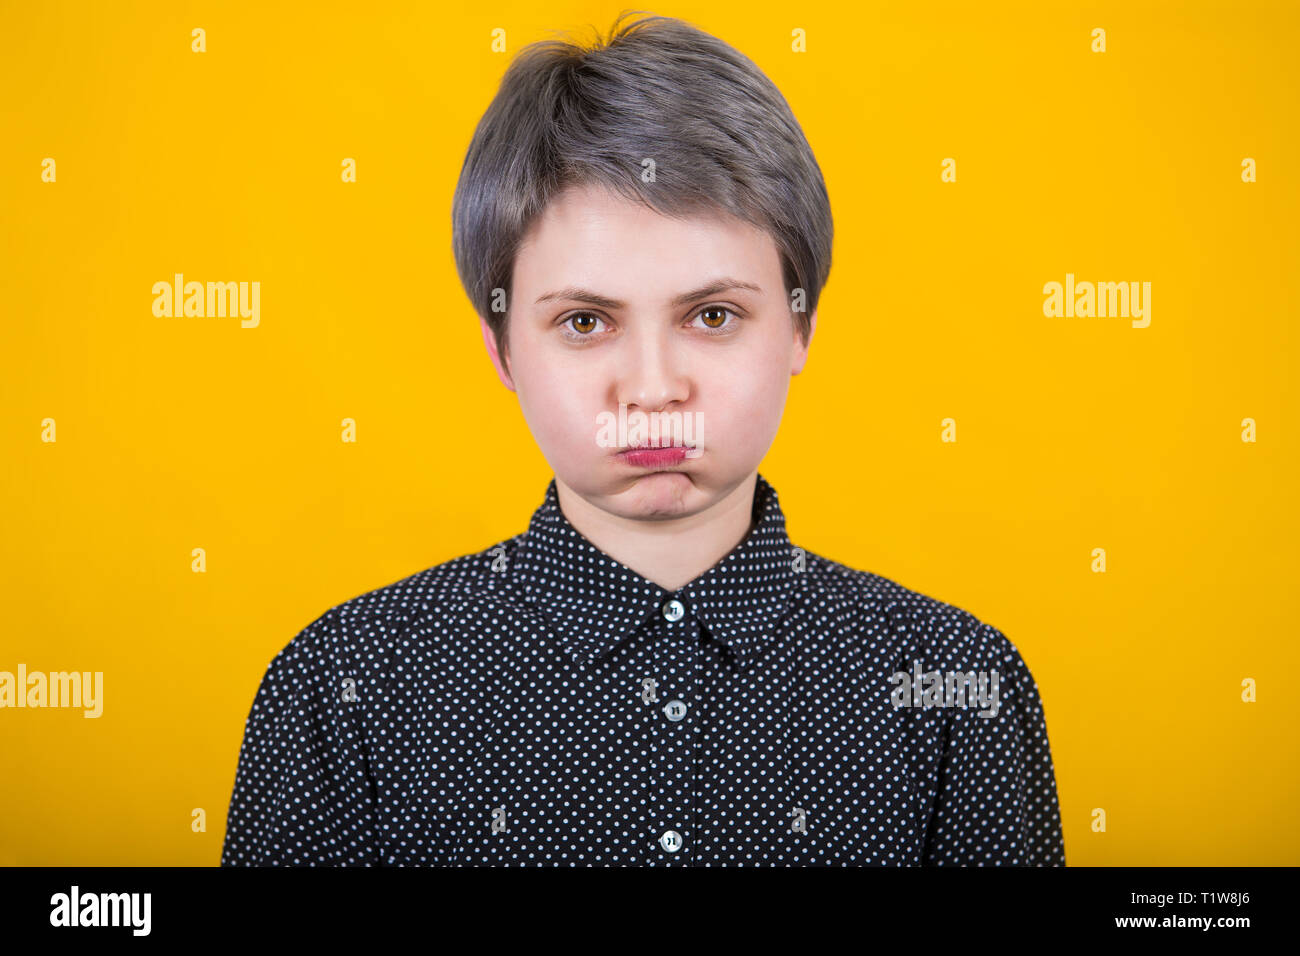 Annoyed irritated young female hipster blowing her cheeks, frowning, feeling tired or frustrated with something. Human facial expressions, emotions an Stock Photo